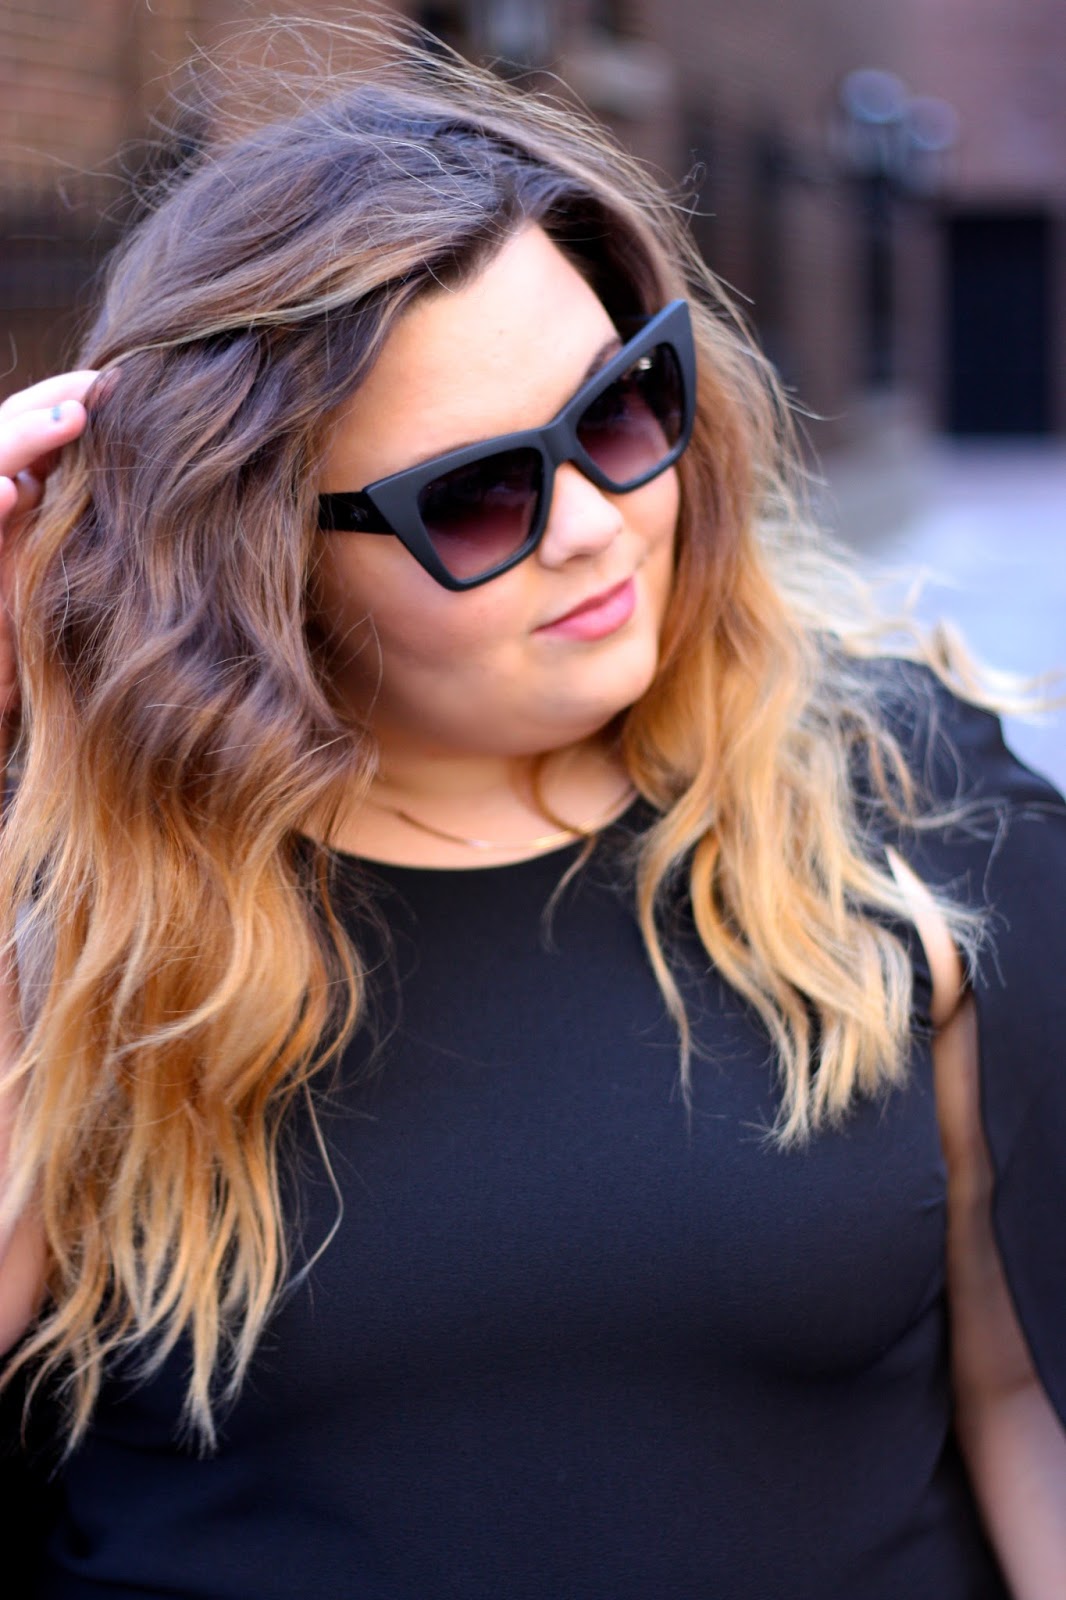 little black dress plus size, LBD, OOTD, natalie craig, cape dress, chicago, natalie in the city, plus size fashion, fashion blogger, forever 21 plus, capes, 2016 fashion trends, why men dont like certain trends, curves and confidence, quay sunglasses blogger, bold sunglasses for my face shape